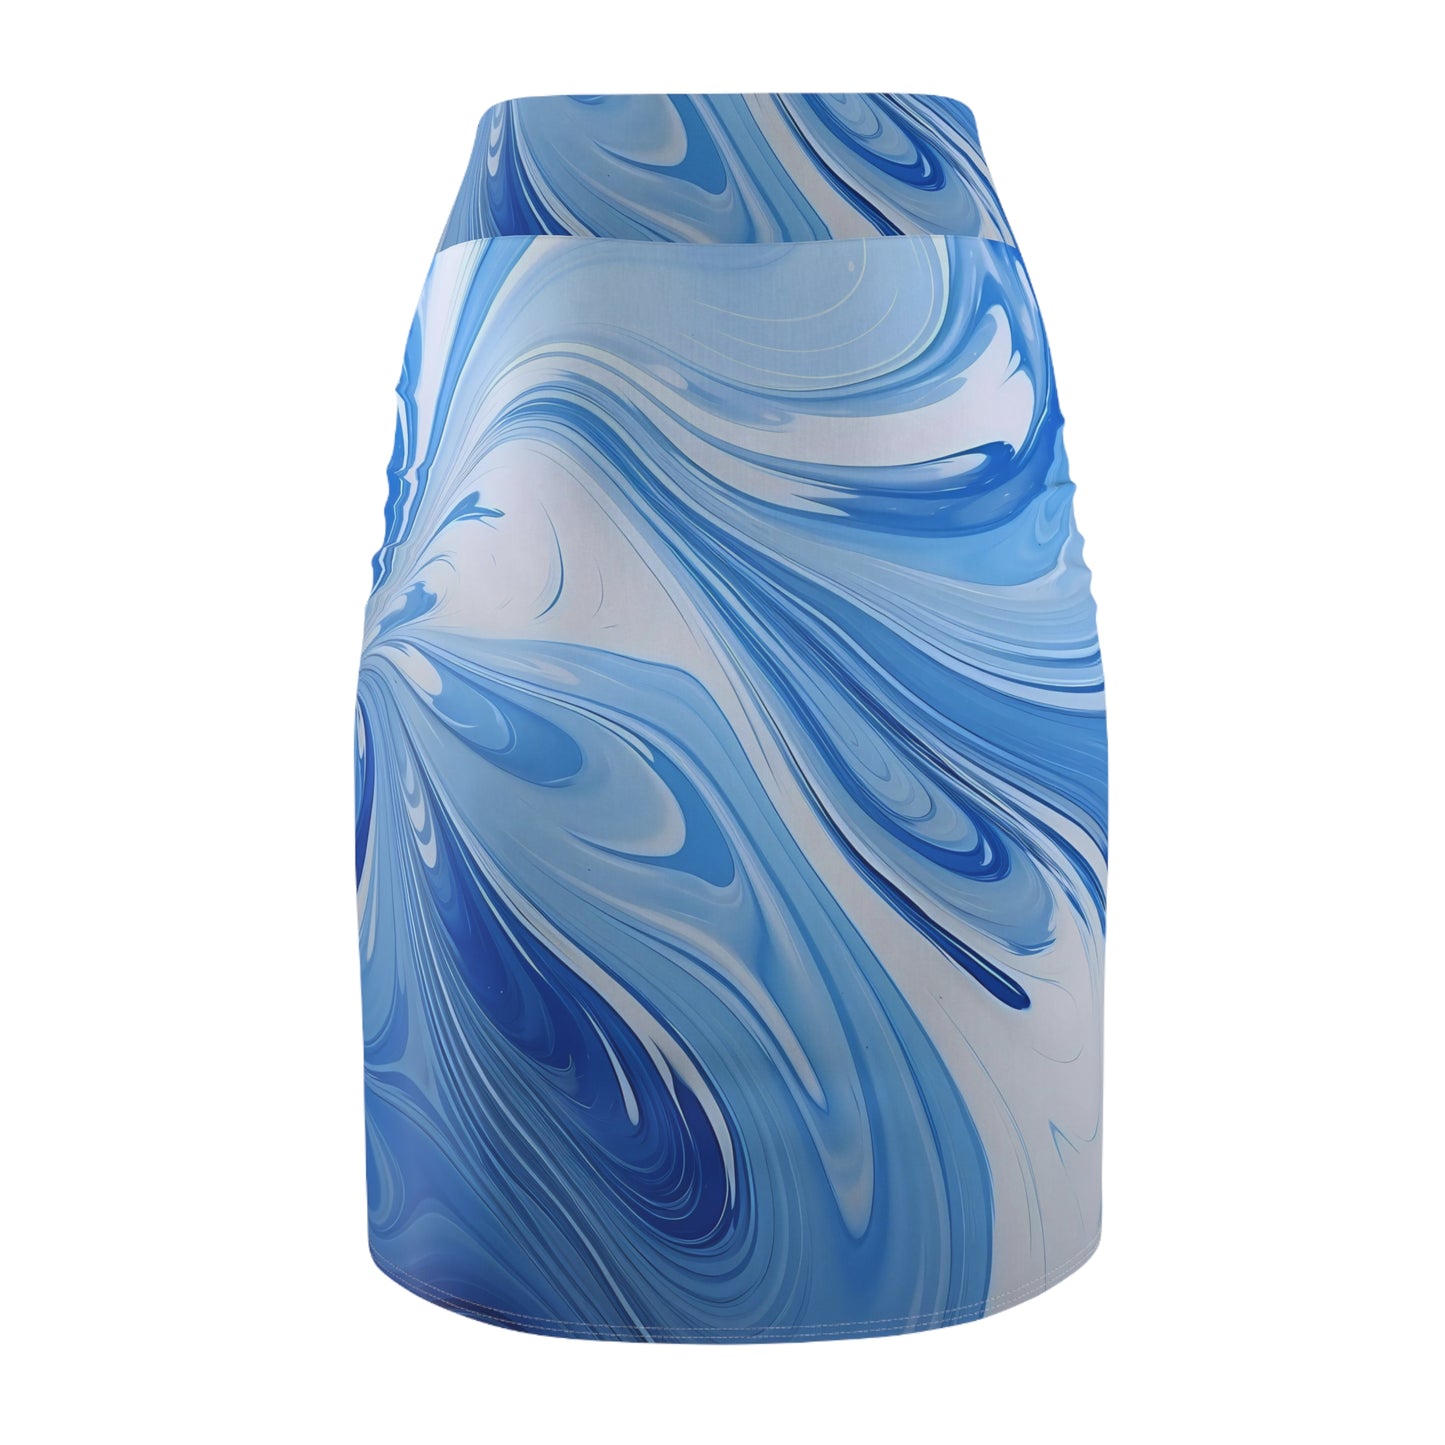 Blue and White Fluid Pencil Skirt